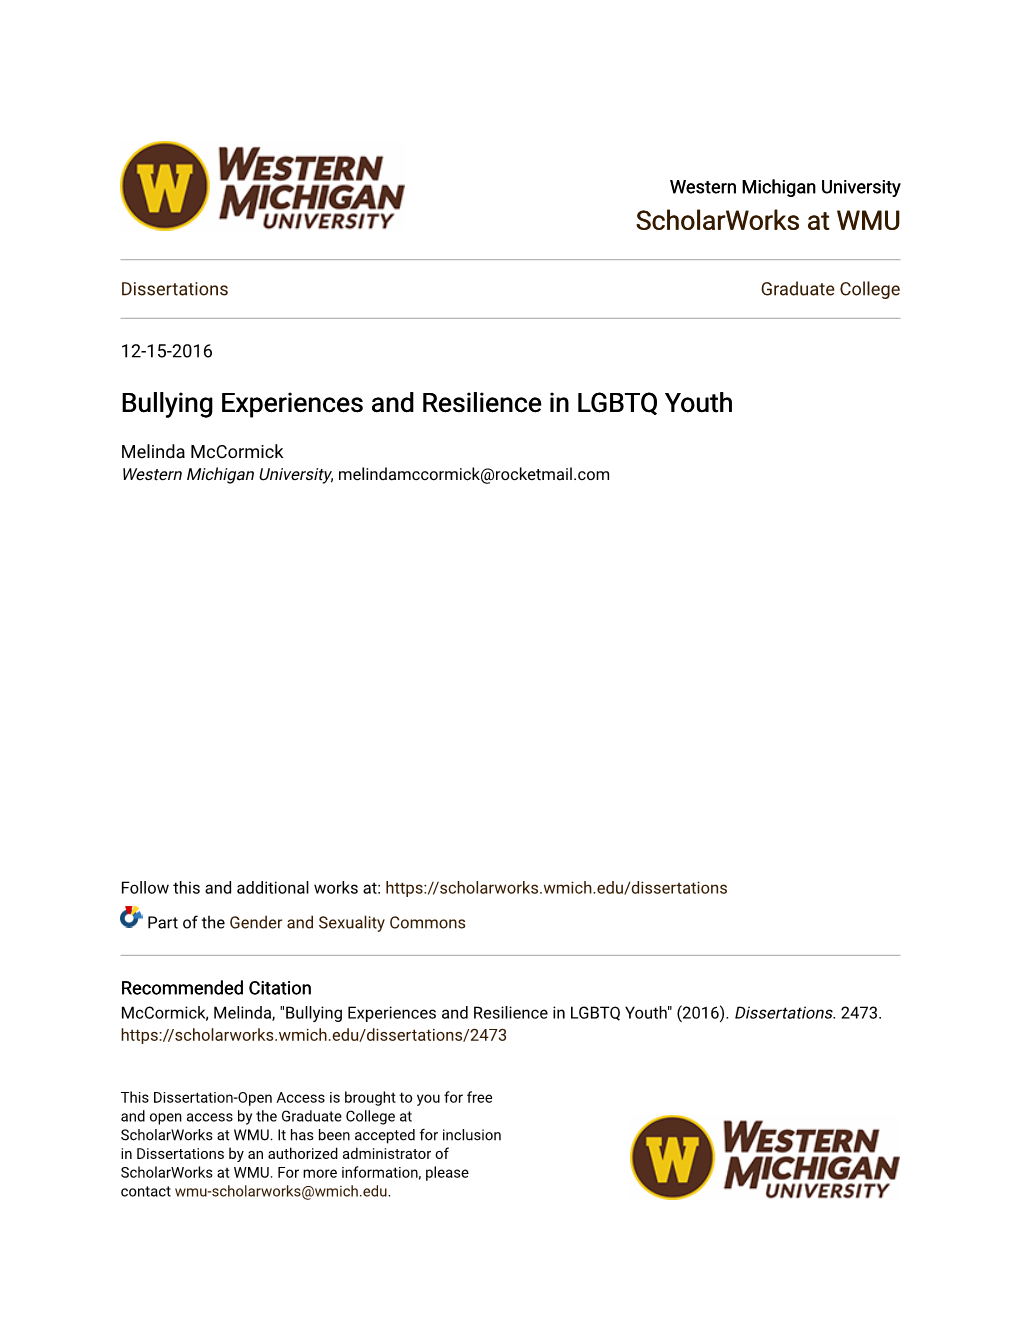 Bullying Experiences and Resilience in LGBTQ Youth